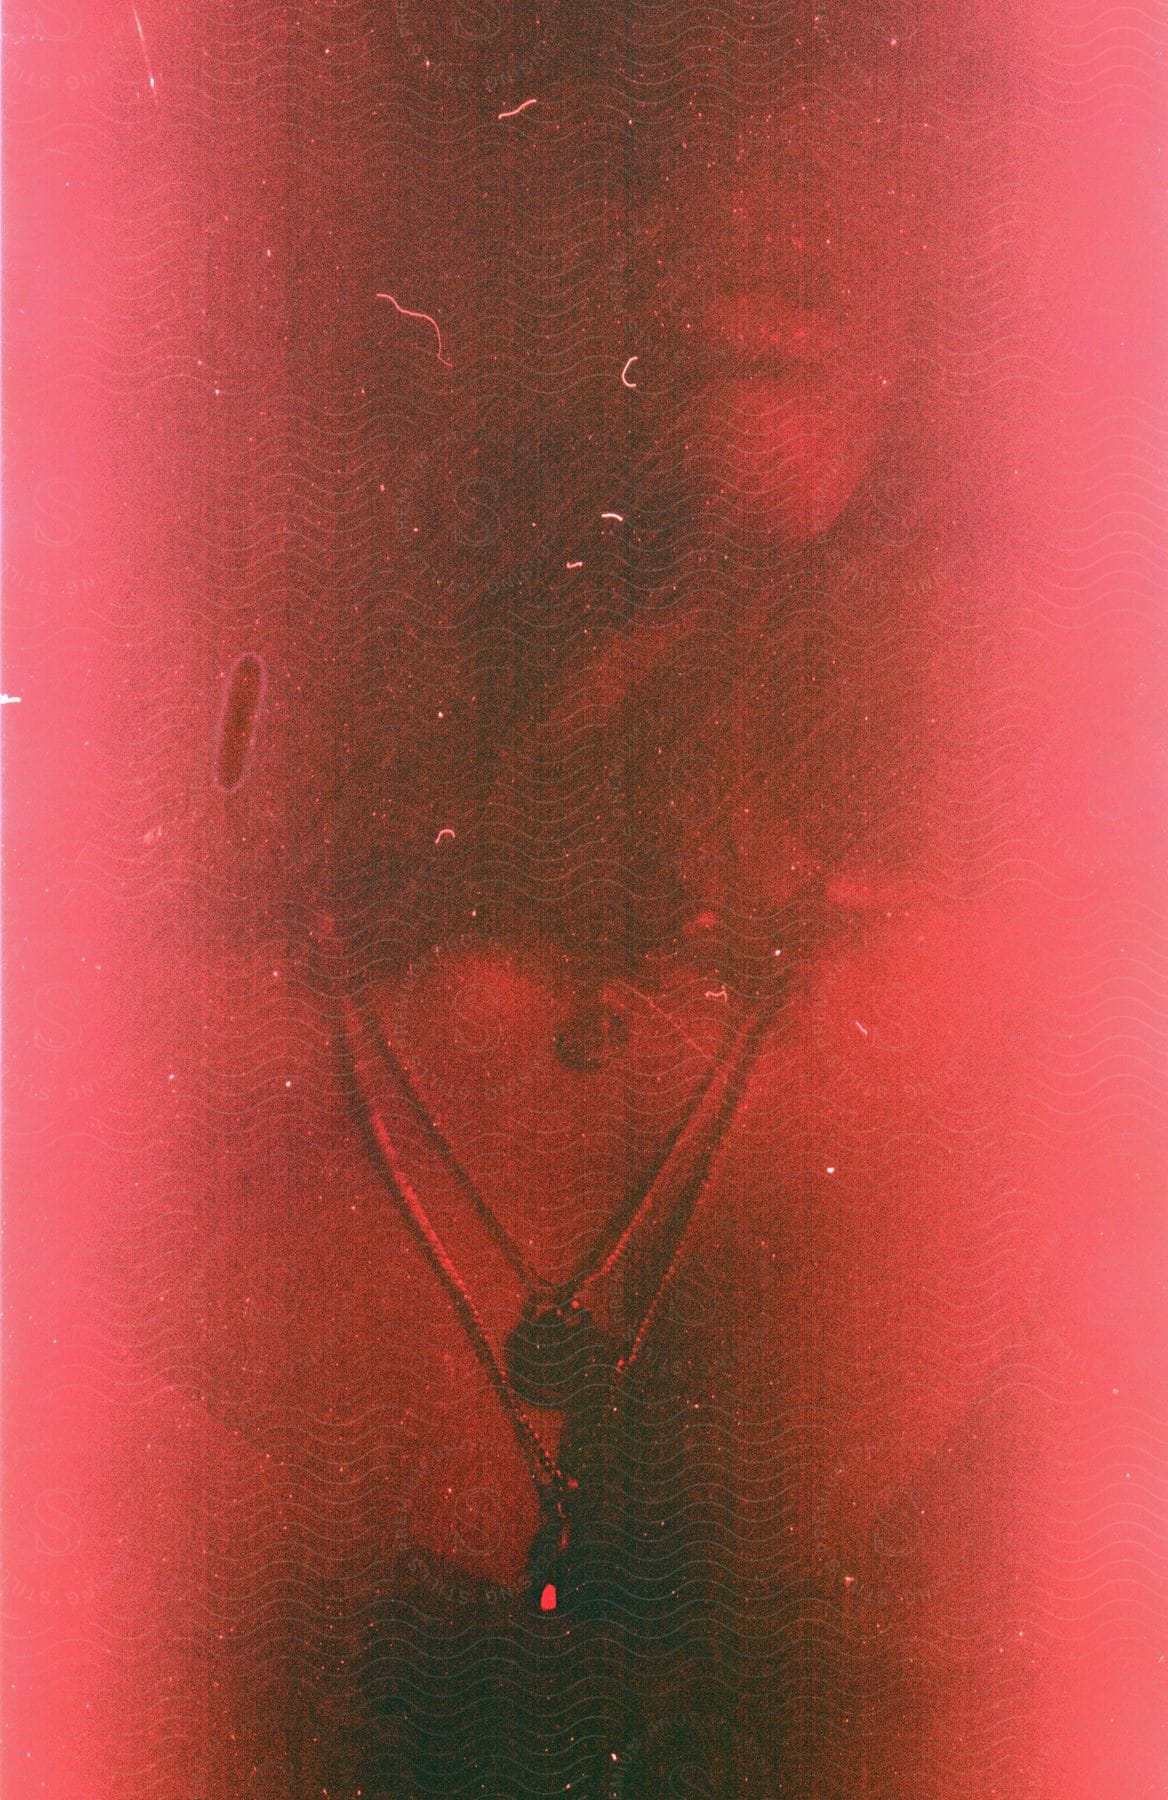 Abstract portrait of a womans face and breast covered in shadows under a red light and textured surface